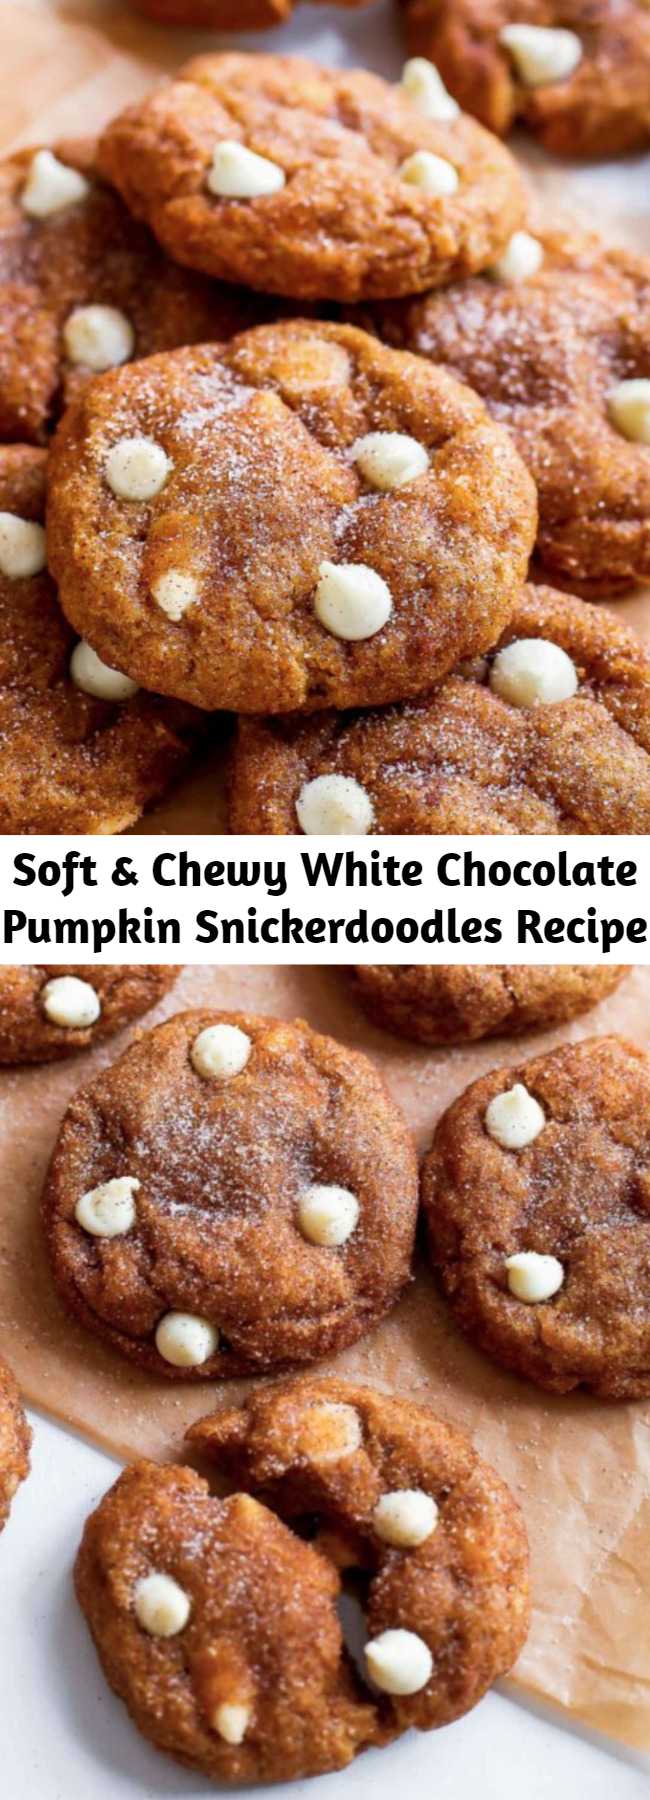 Soft & Chewy White Chocolate Pumpkin Snickerdoodles Recipe - These soft & chewy snickerdoodle cookies are full of pumpkin, white chocolate, and cinnamon sugar. Everything you love about snickerdoodle cookies and pumpkin pie in one. Warning: they disappear quickly, so make a double batch!